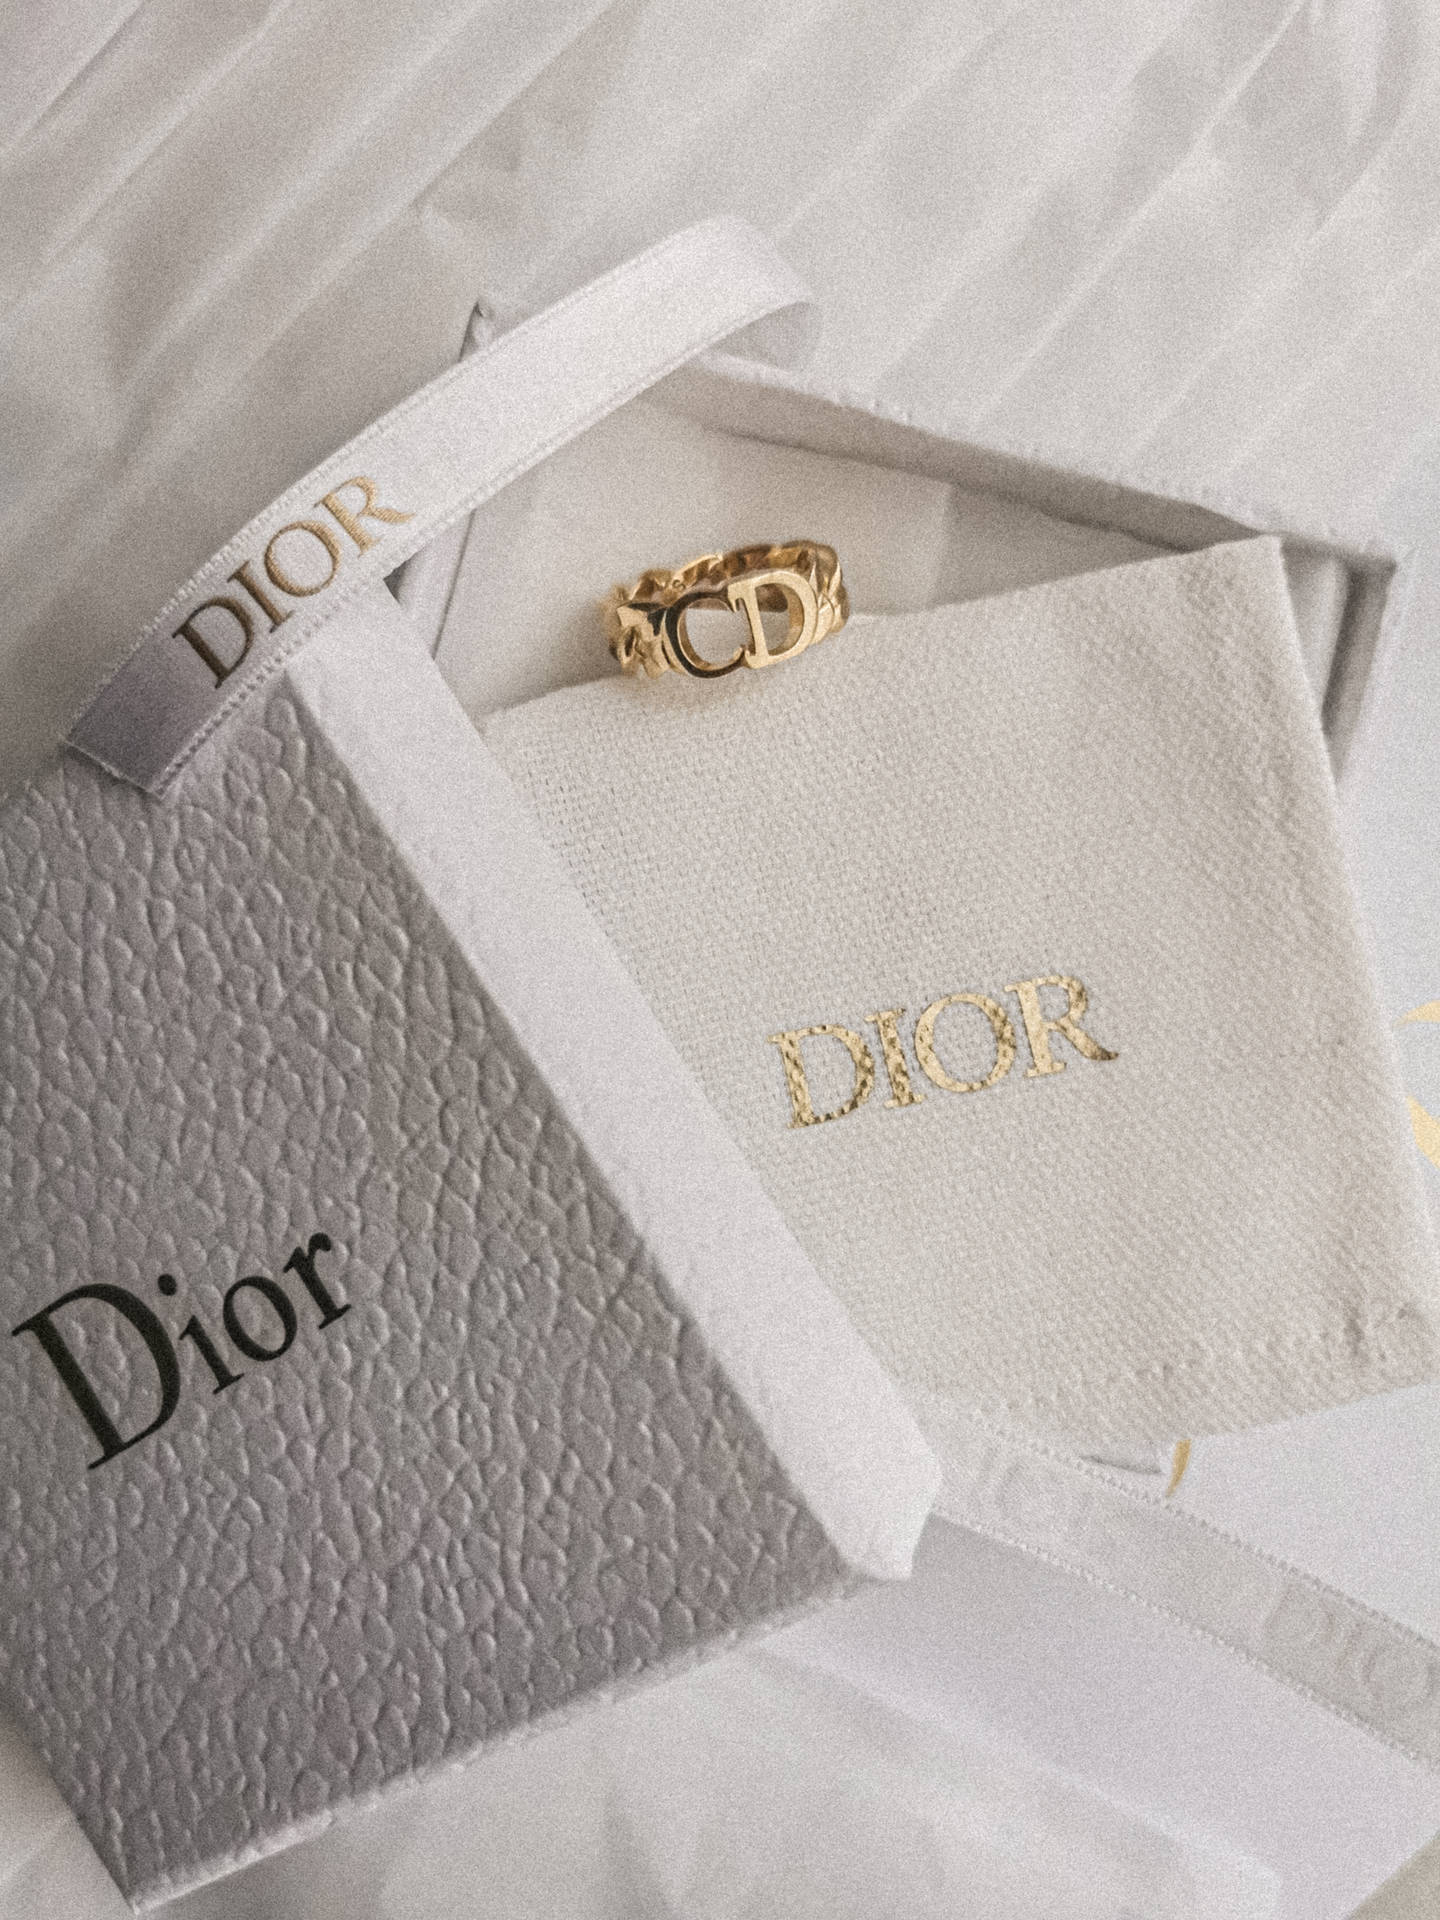 Dior Gold Ring And Gift Box Background